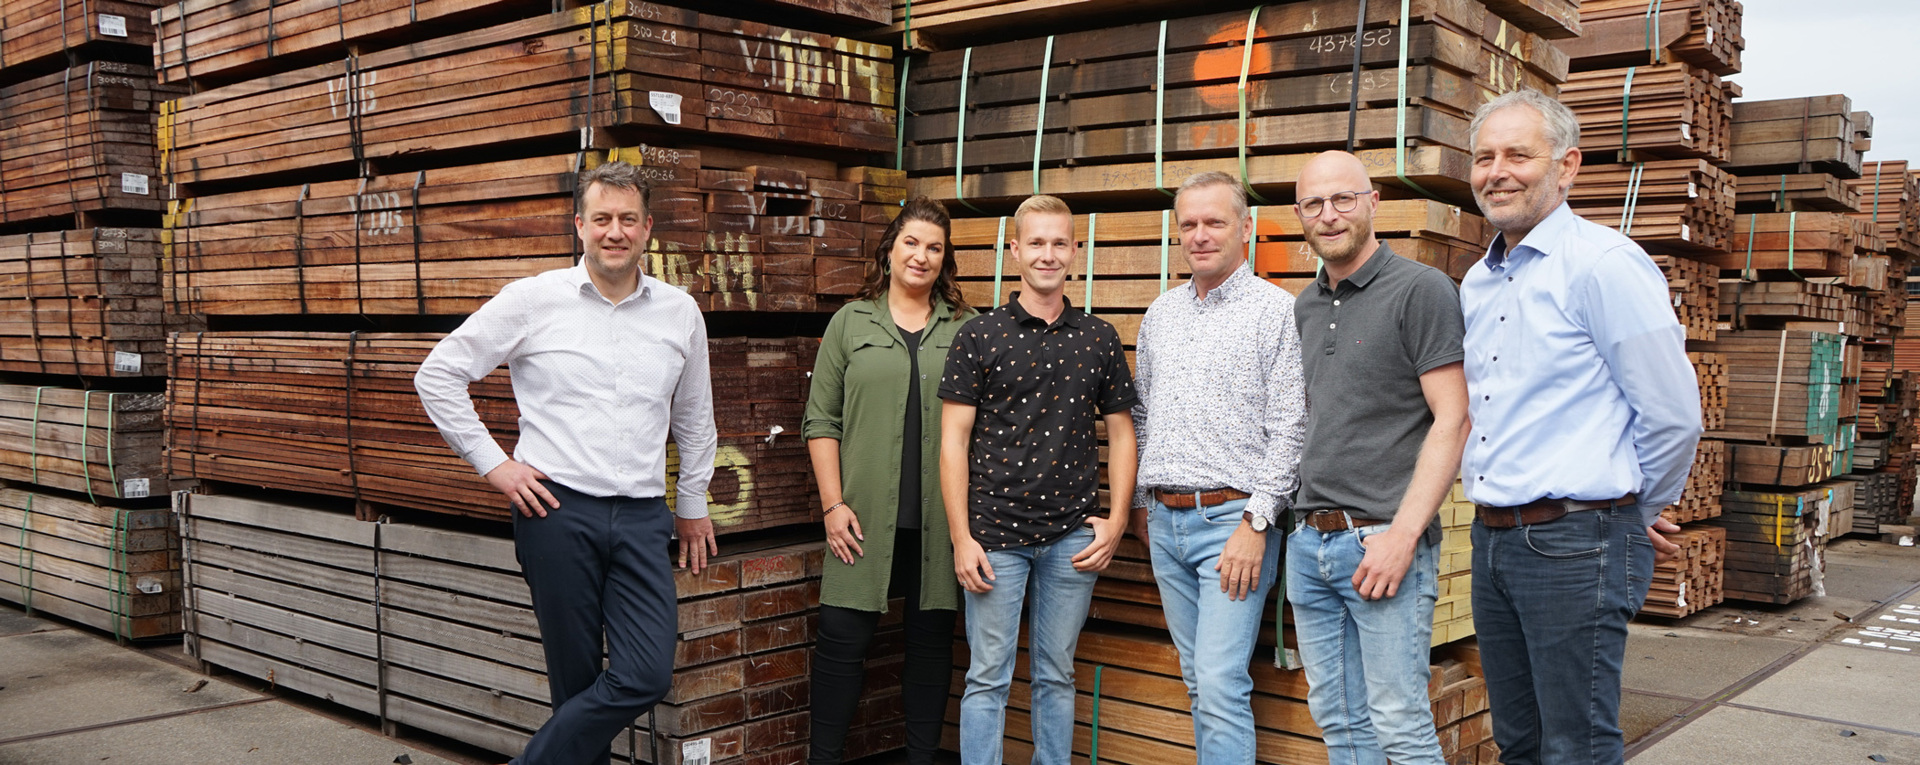 our team hardwood importers and specialists